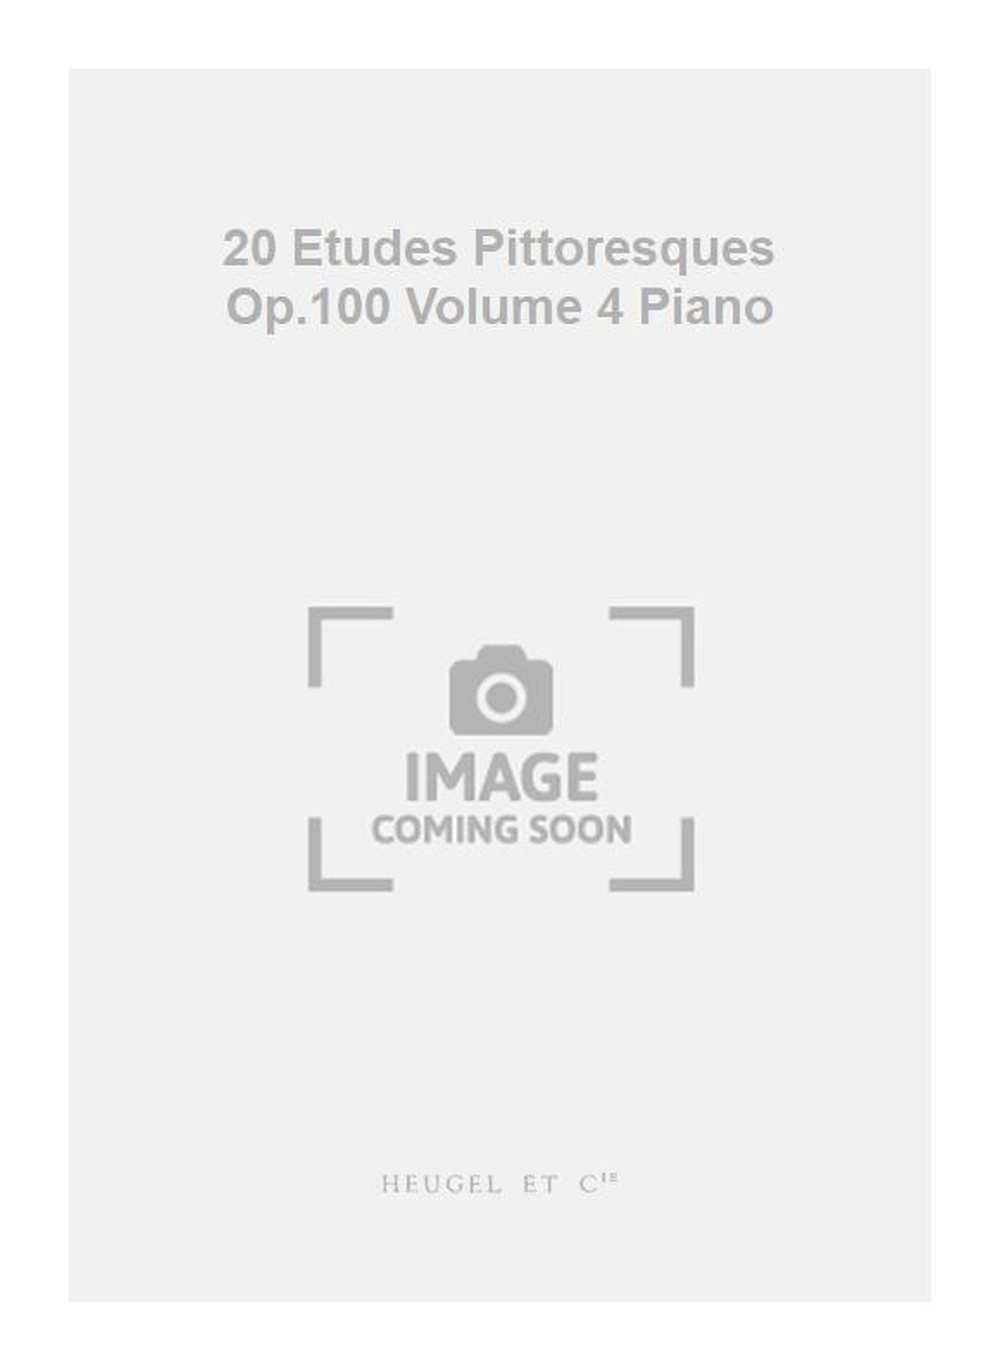 Georges Bull: 20 Etudes Pittoresques Op.100 Volume 4 Piano